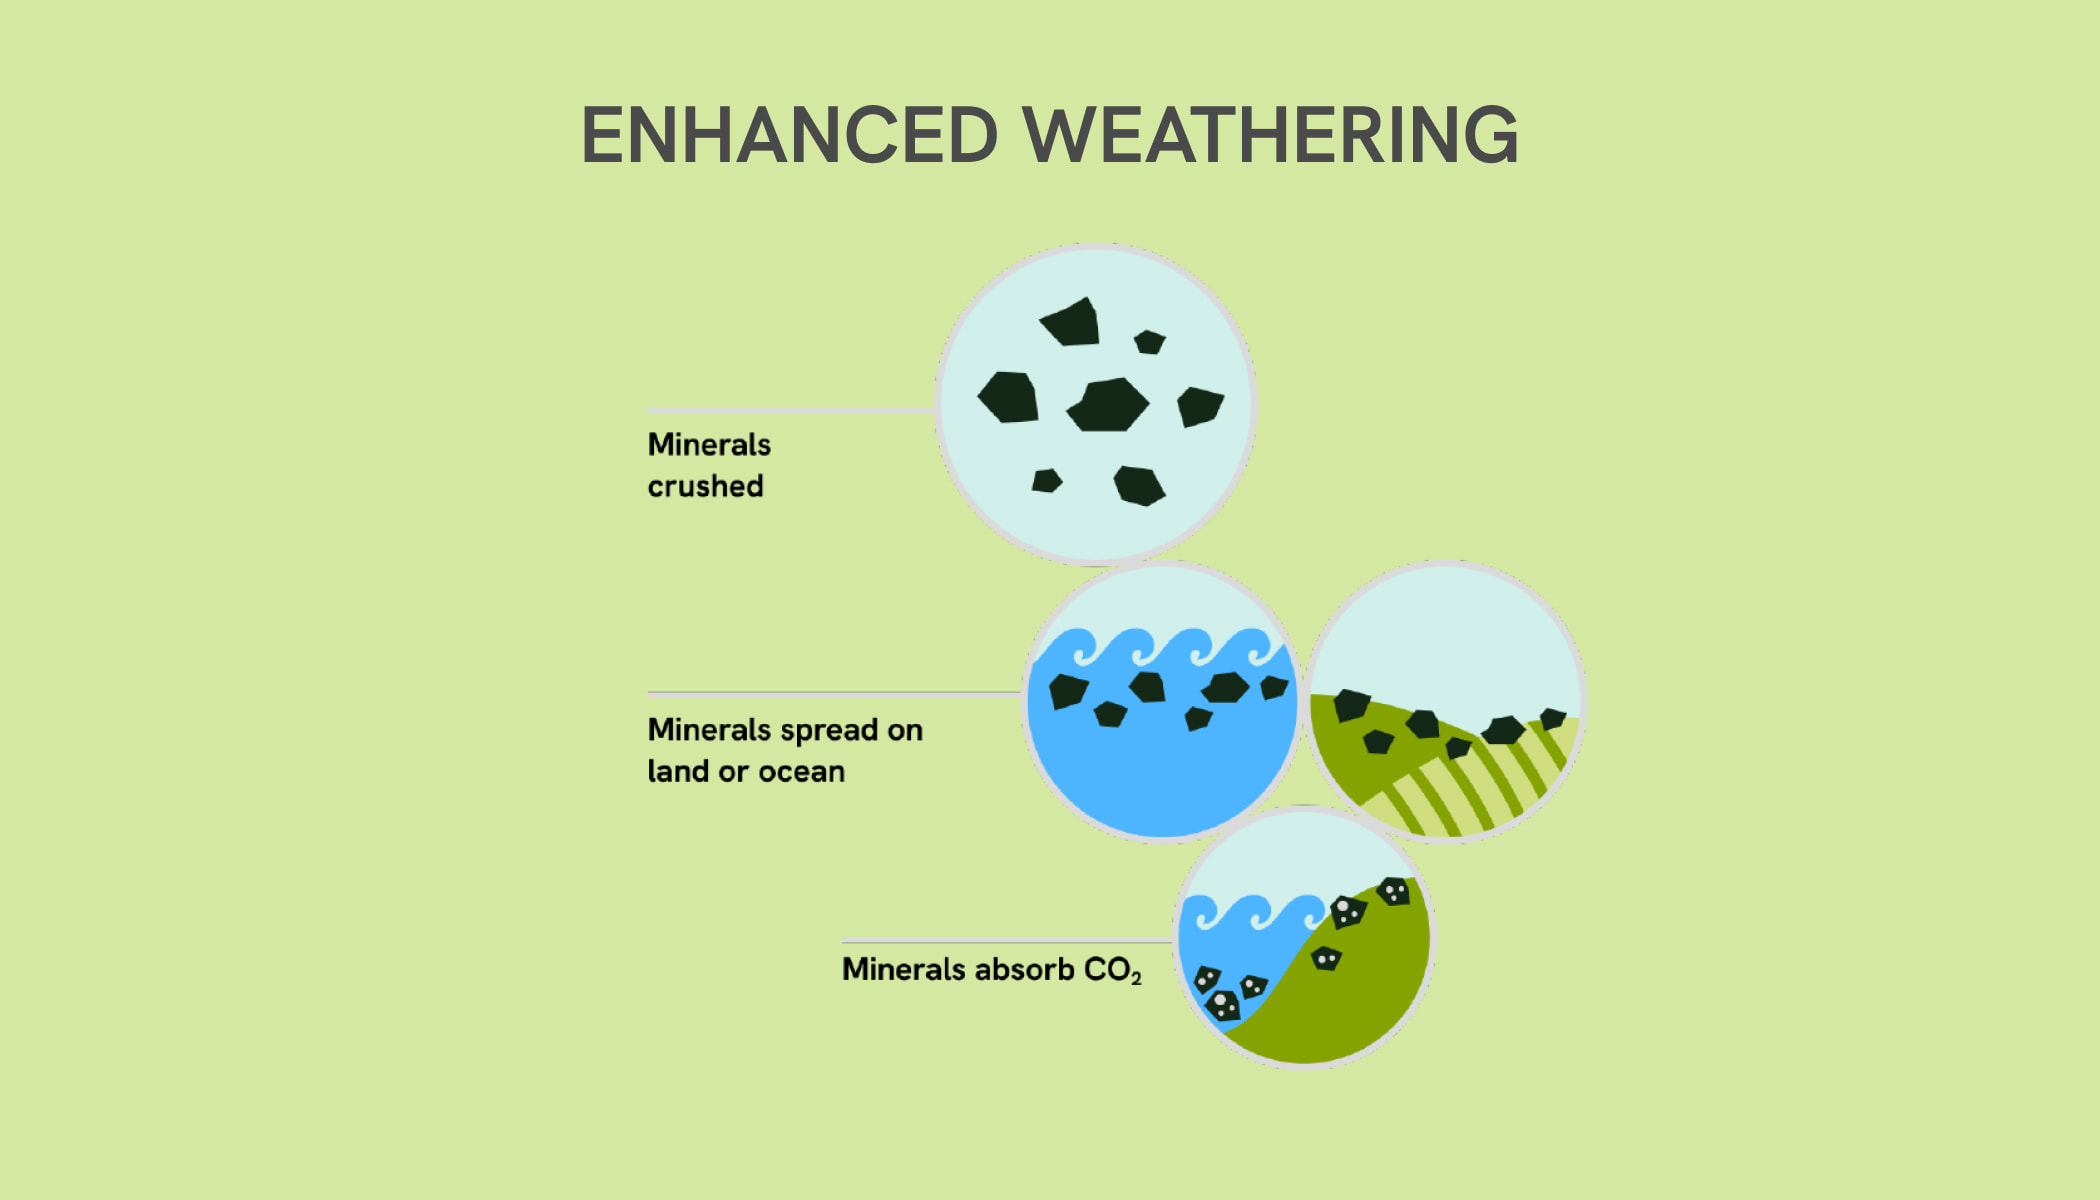 A diagram of enhanced weathering. 1) Minerals crushed. 2) Minerals spread on land or ocean. 3) Minerals absorb CO2.